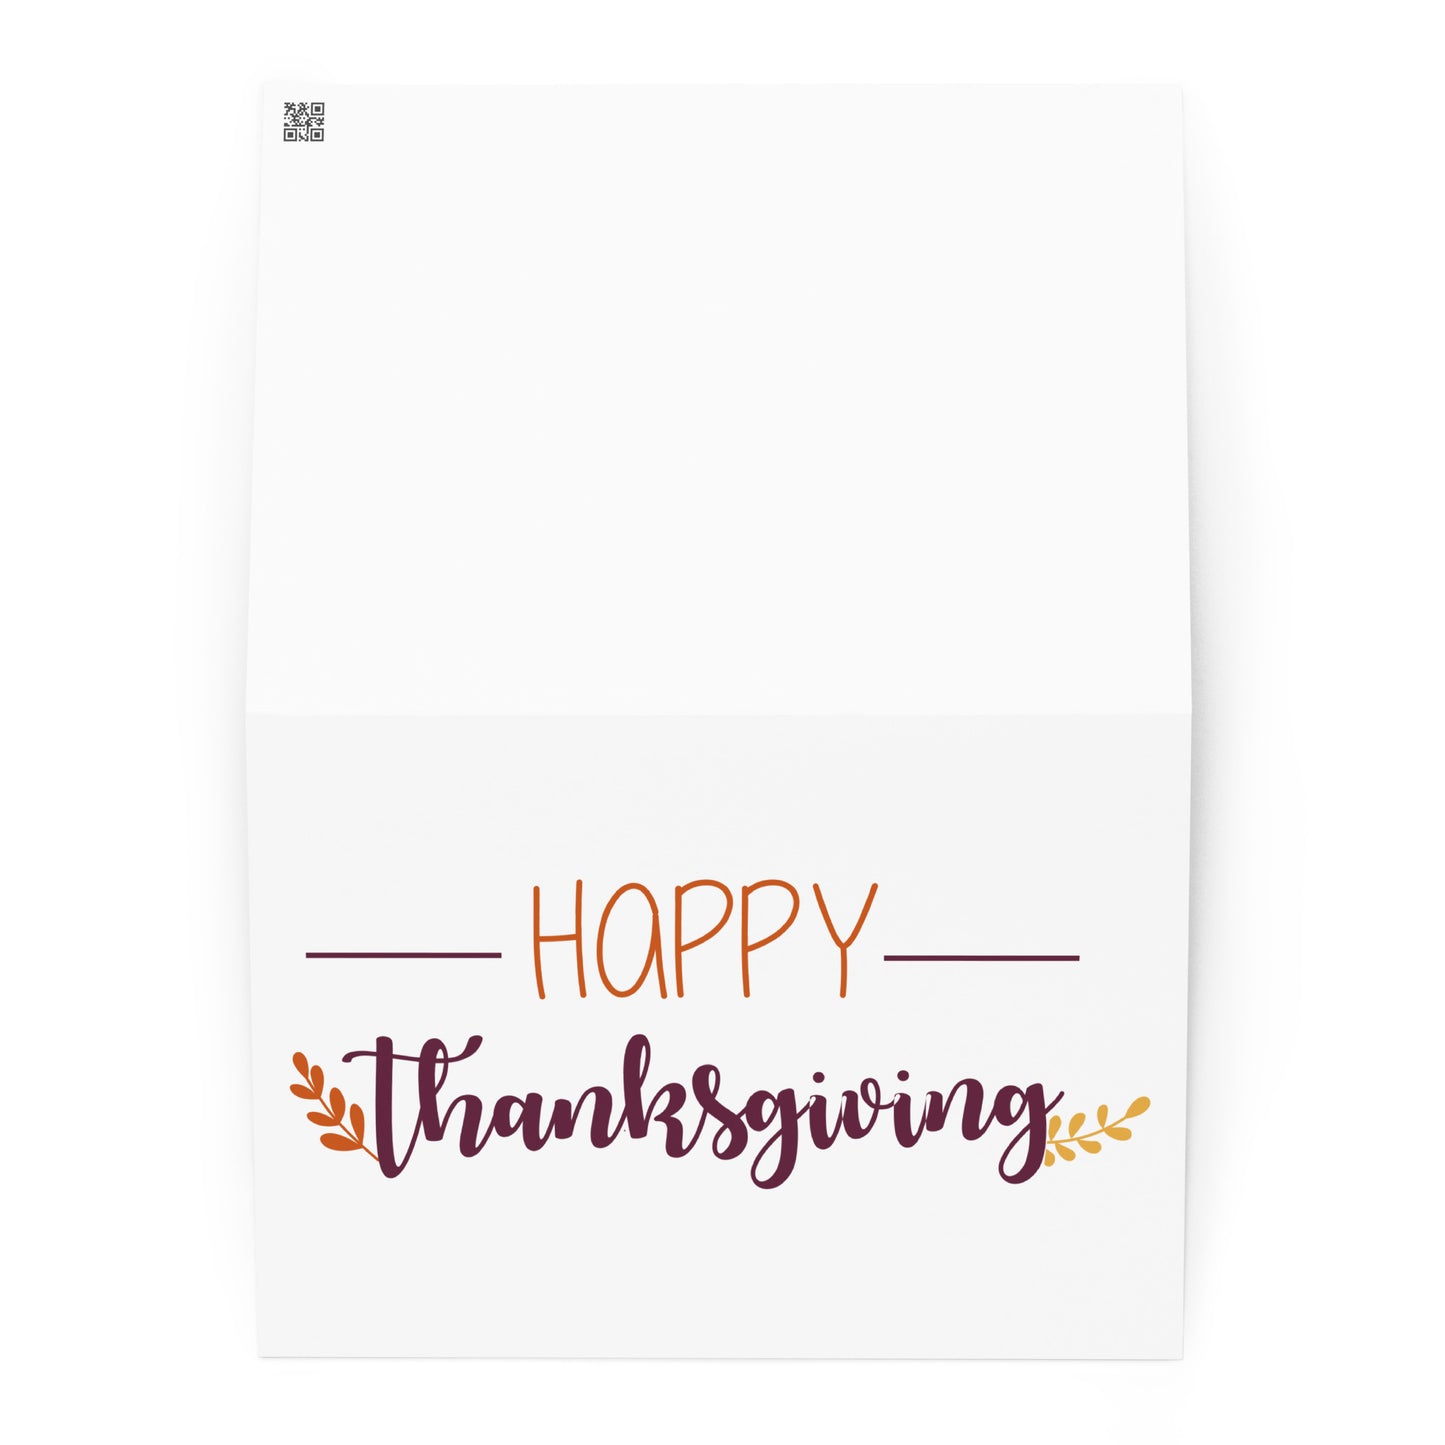 Happy Thanksgiving Greeting card